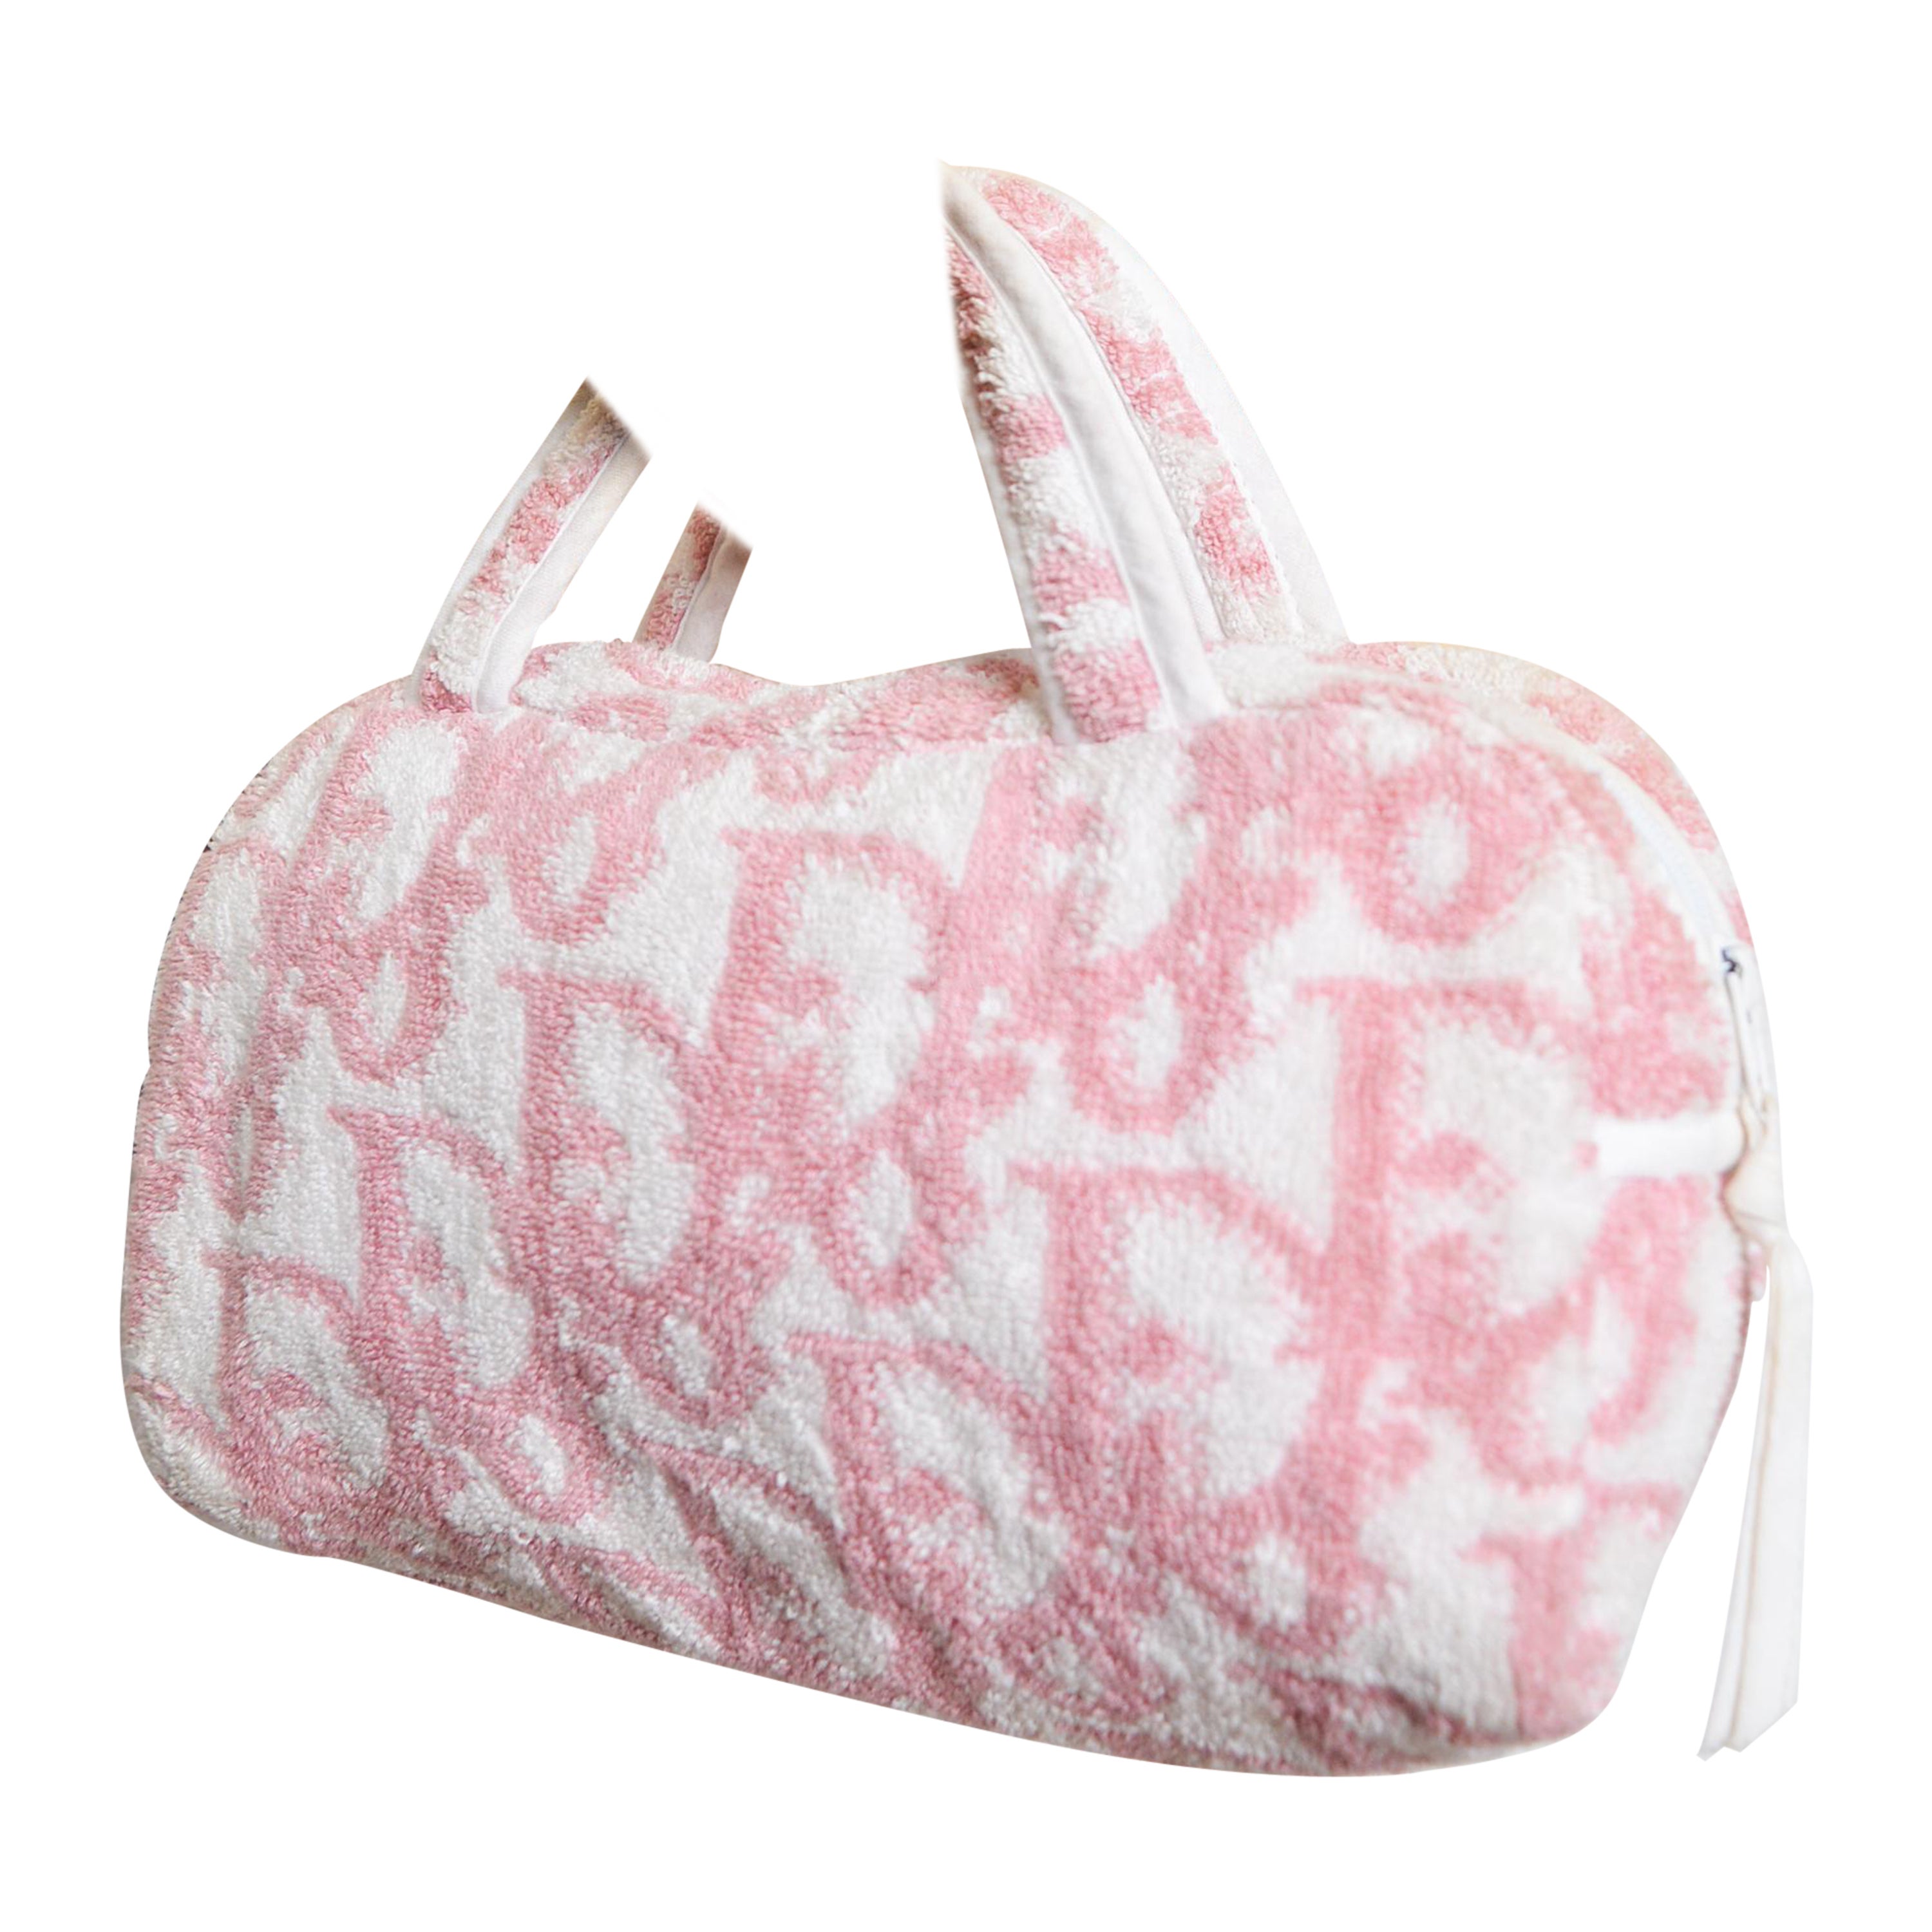 A Vintage Christian Dior Mini bag (circa 2000), by John Galliano constructed from a Pink and white trotter print terry cloth material.  

MADE IN FRANCE.  

Features ; Two handles, Zip fasten closure, Wipeable Plastic interior lining, 2 slip pockets